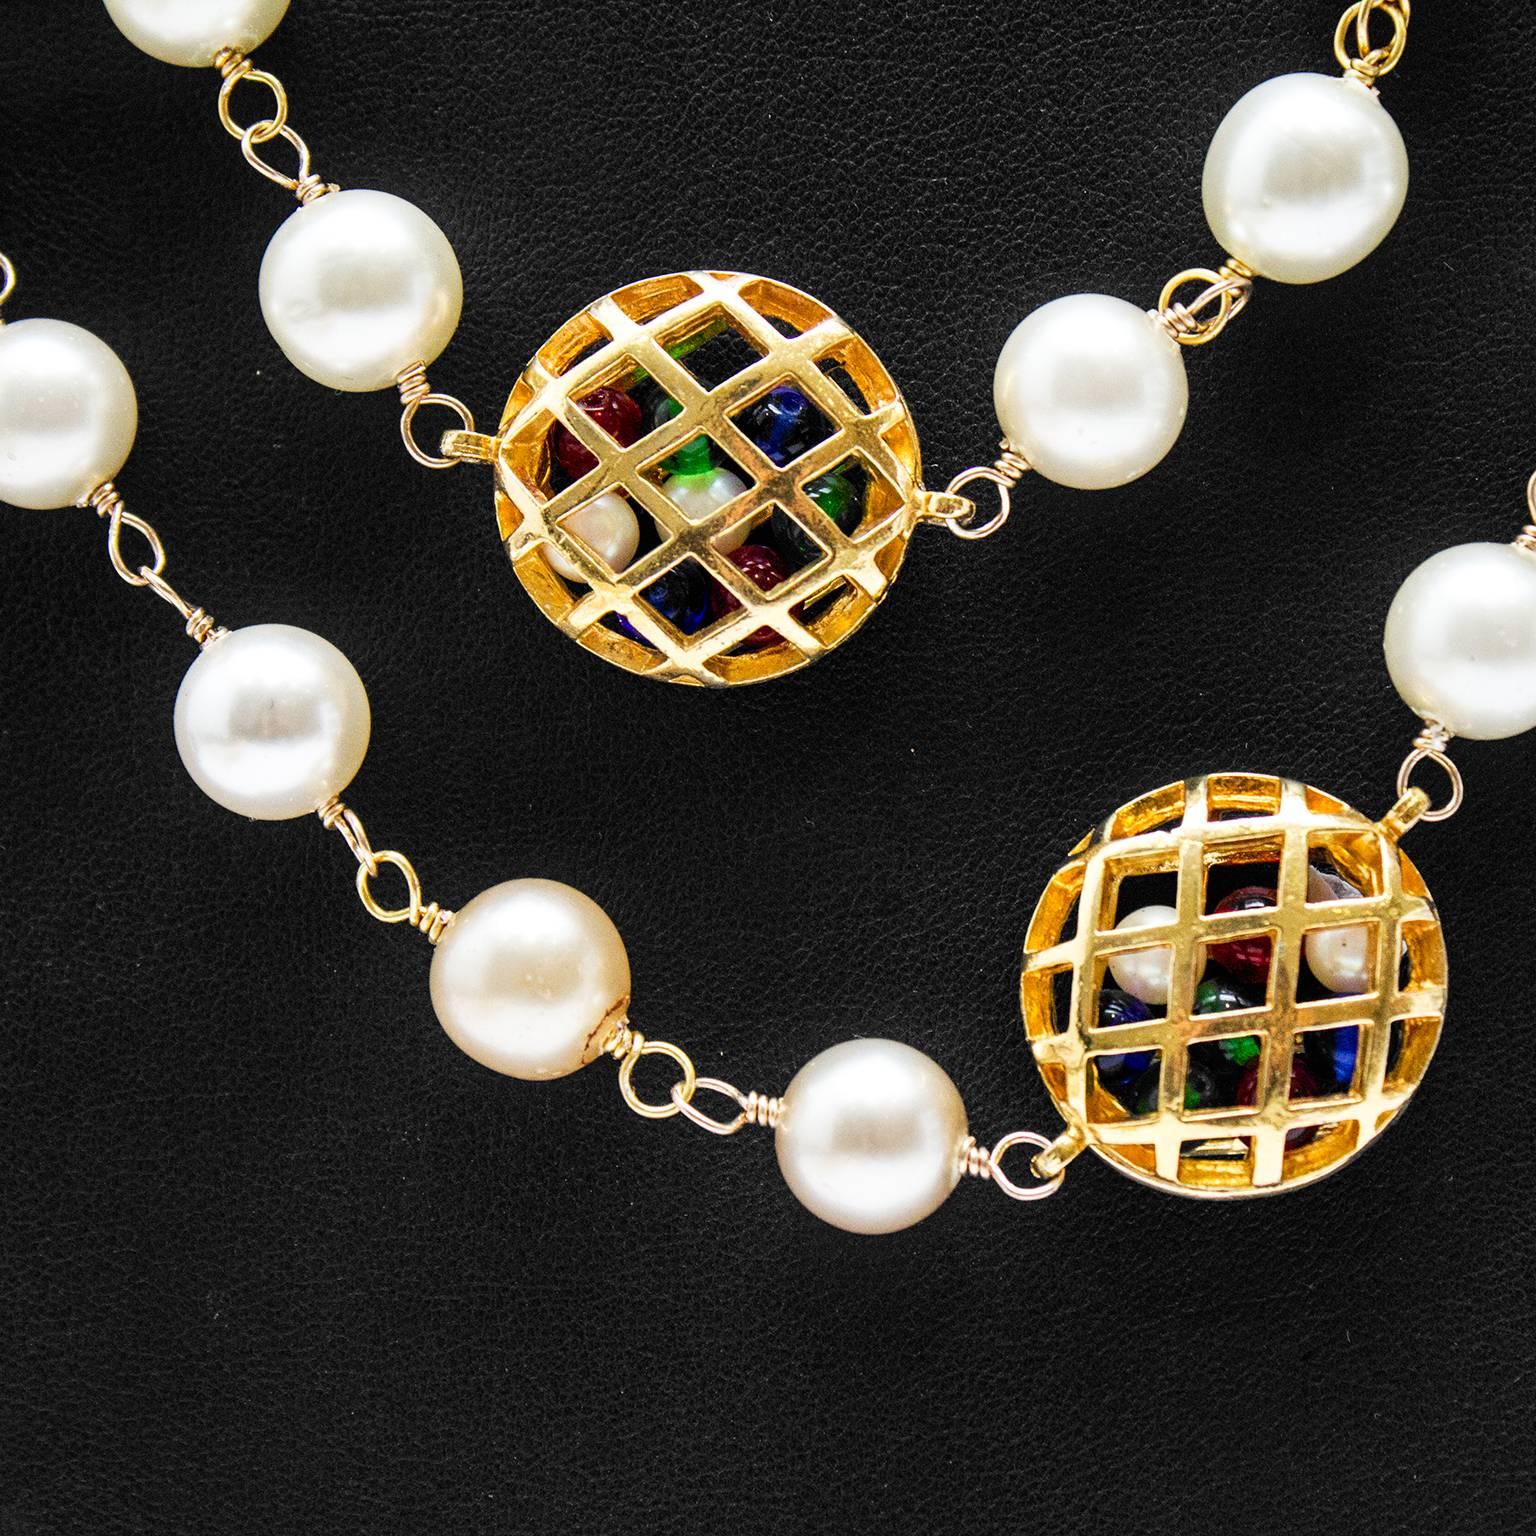 Excellent1980's Chanel necklace featuring pearls and hollow basket weave gold cages filled with green, blue and red poured glass beads. Can be worn long or wrapped around neck. Chanel markings on inside of cage near clasp, in excellent condition.